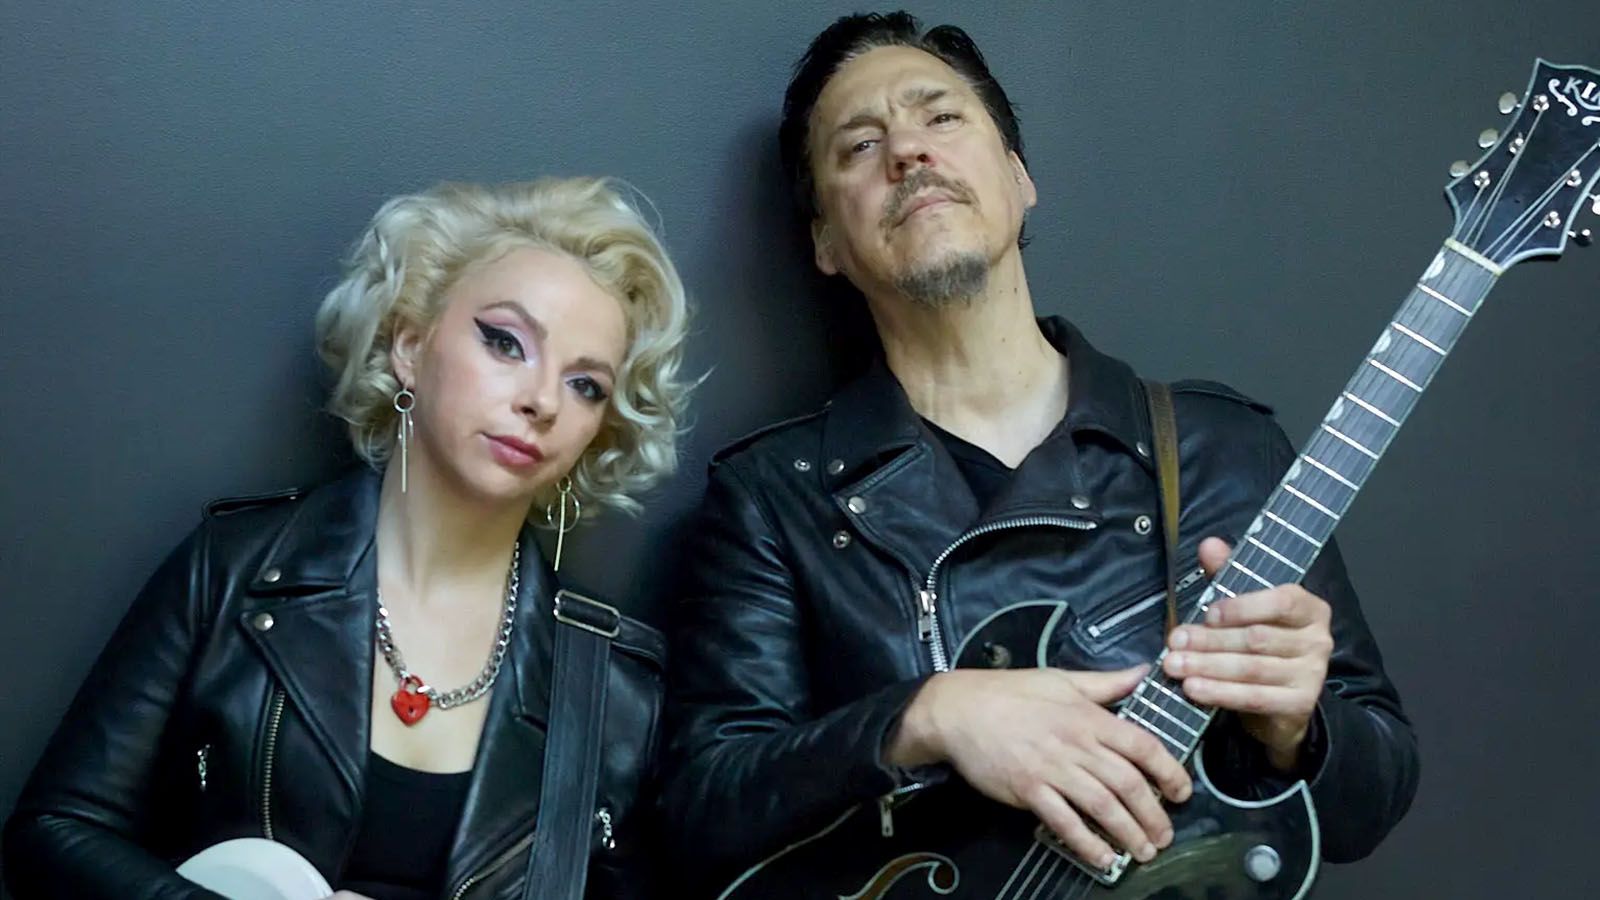 Samantha Fish and Jesse Dayton will bring their Death Wish Tour to Sweetwater Performance Pavilion on July 30.